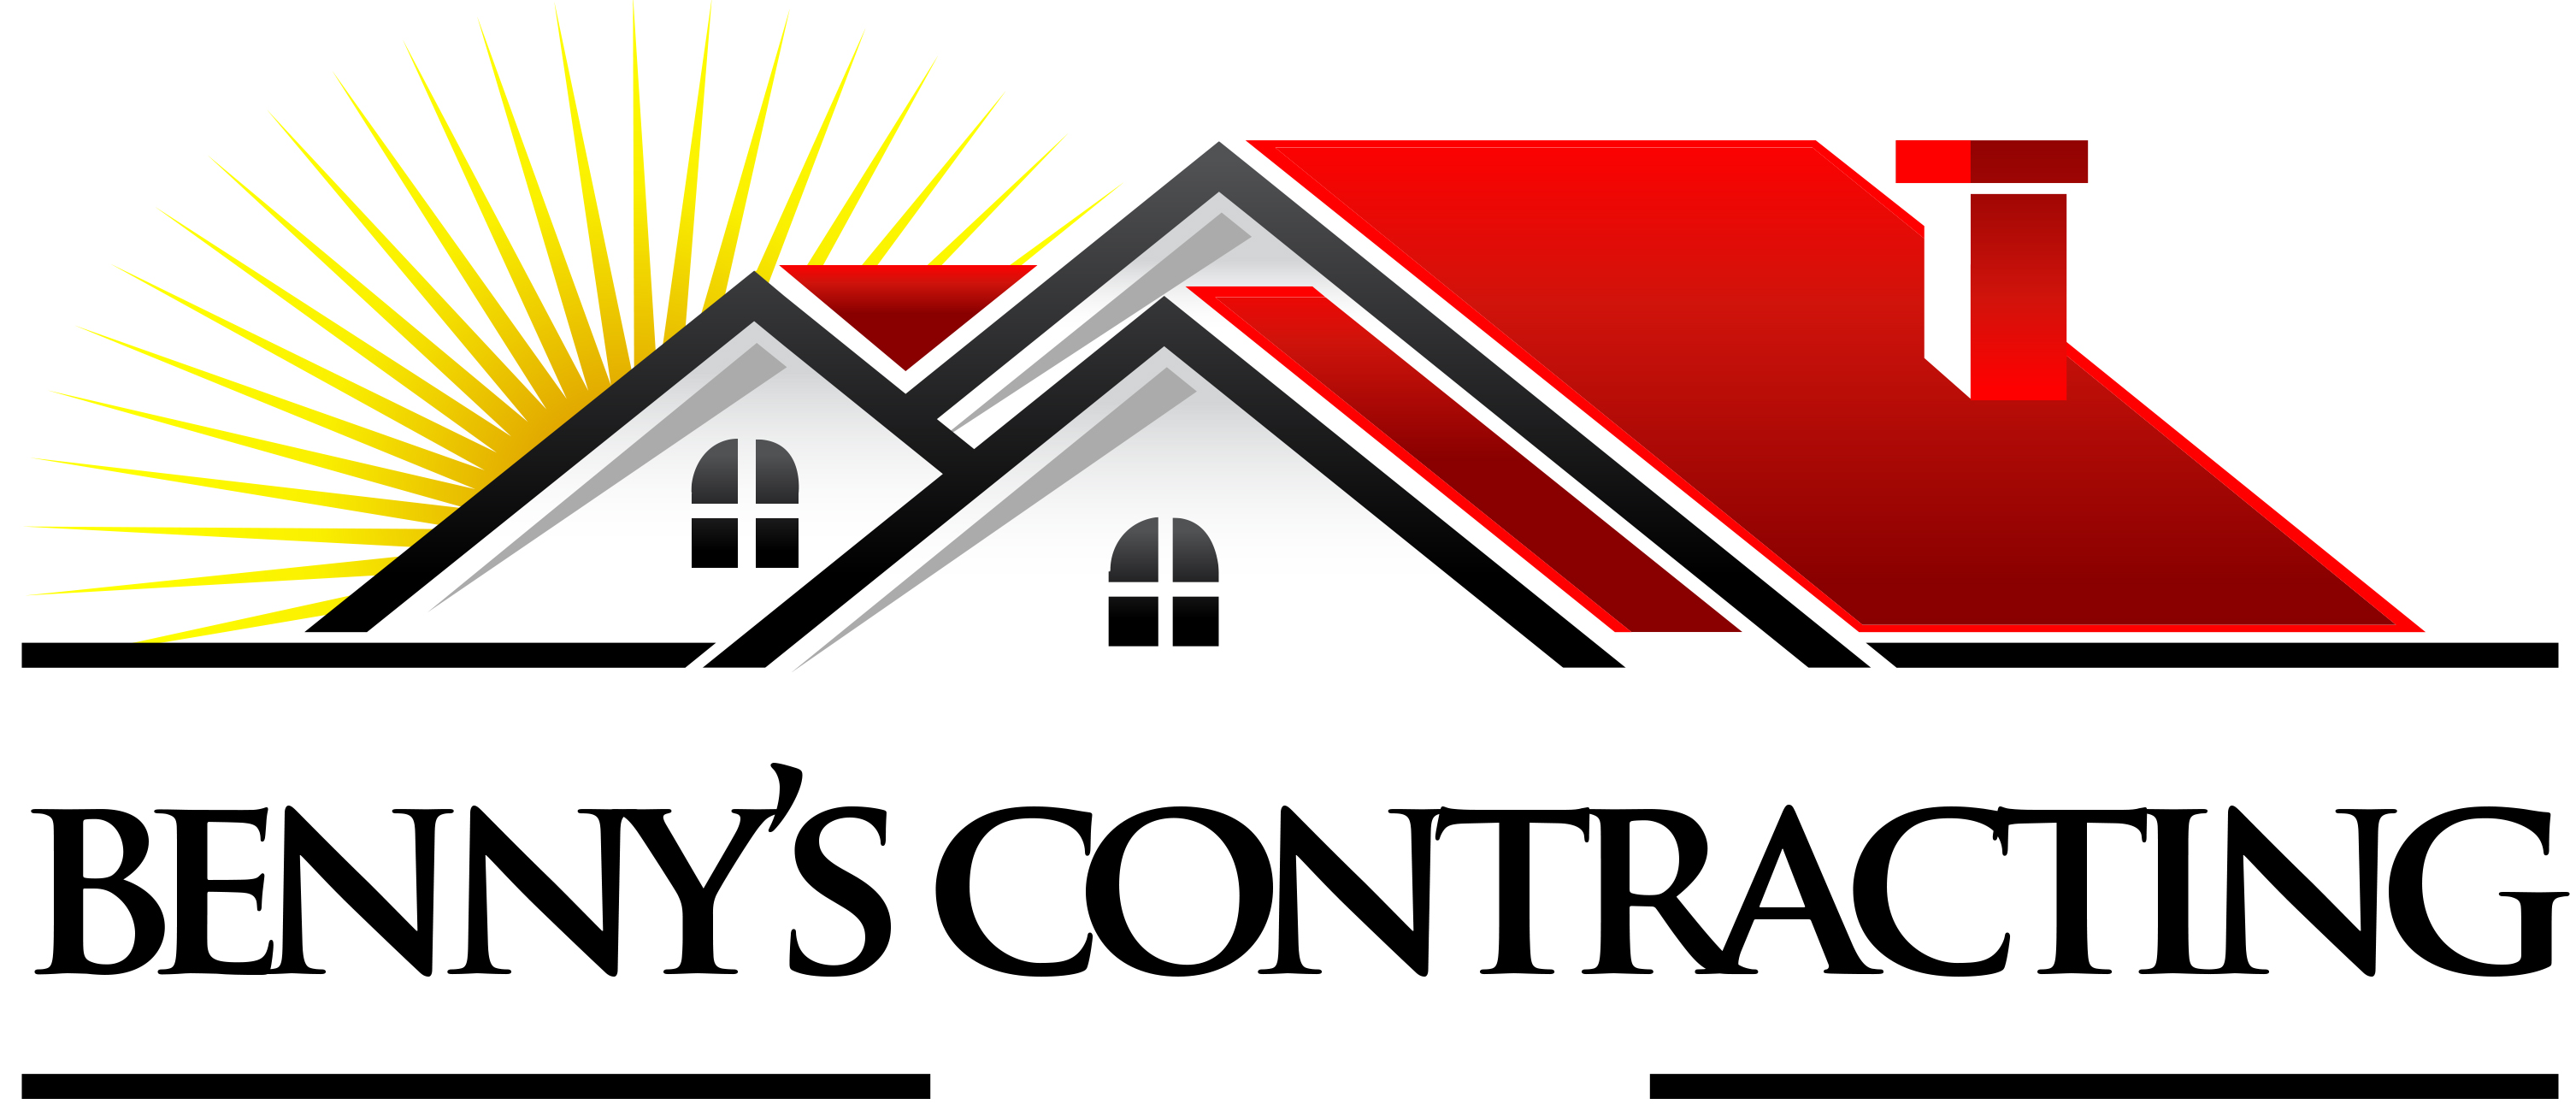 Benny's Contracting